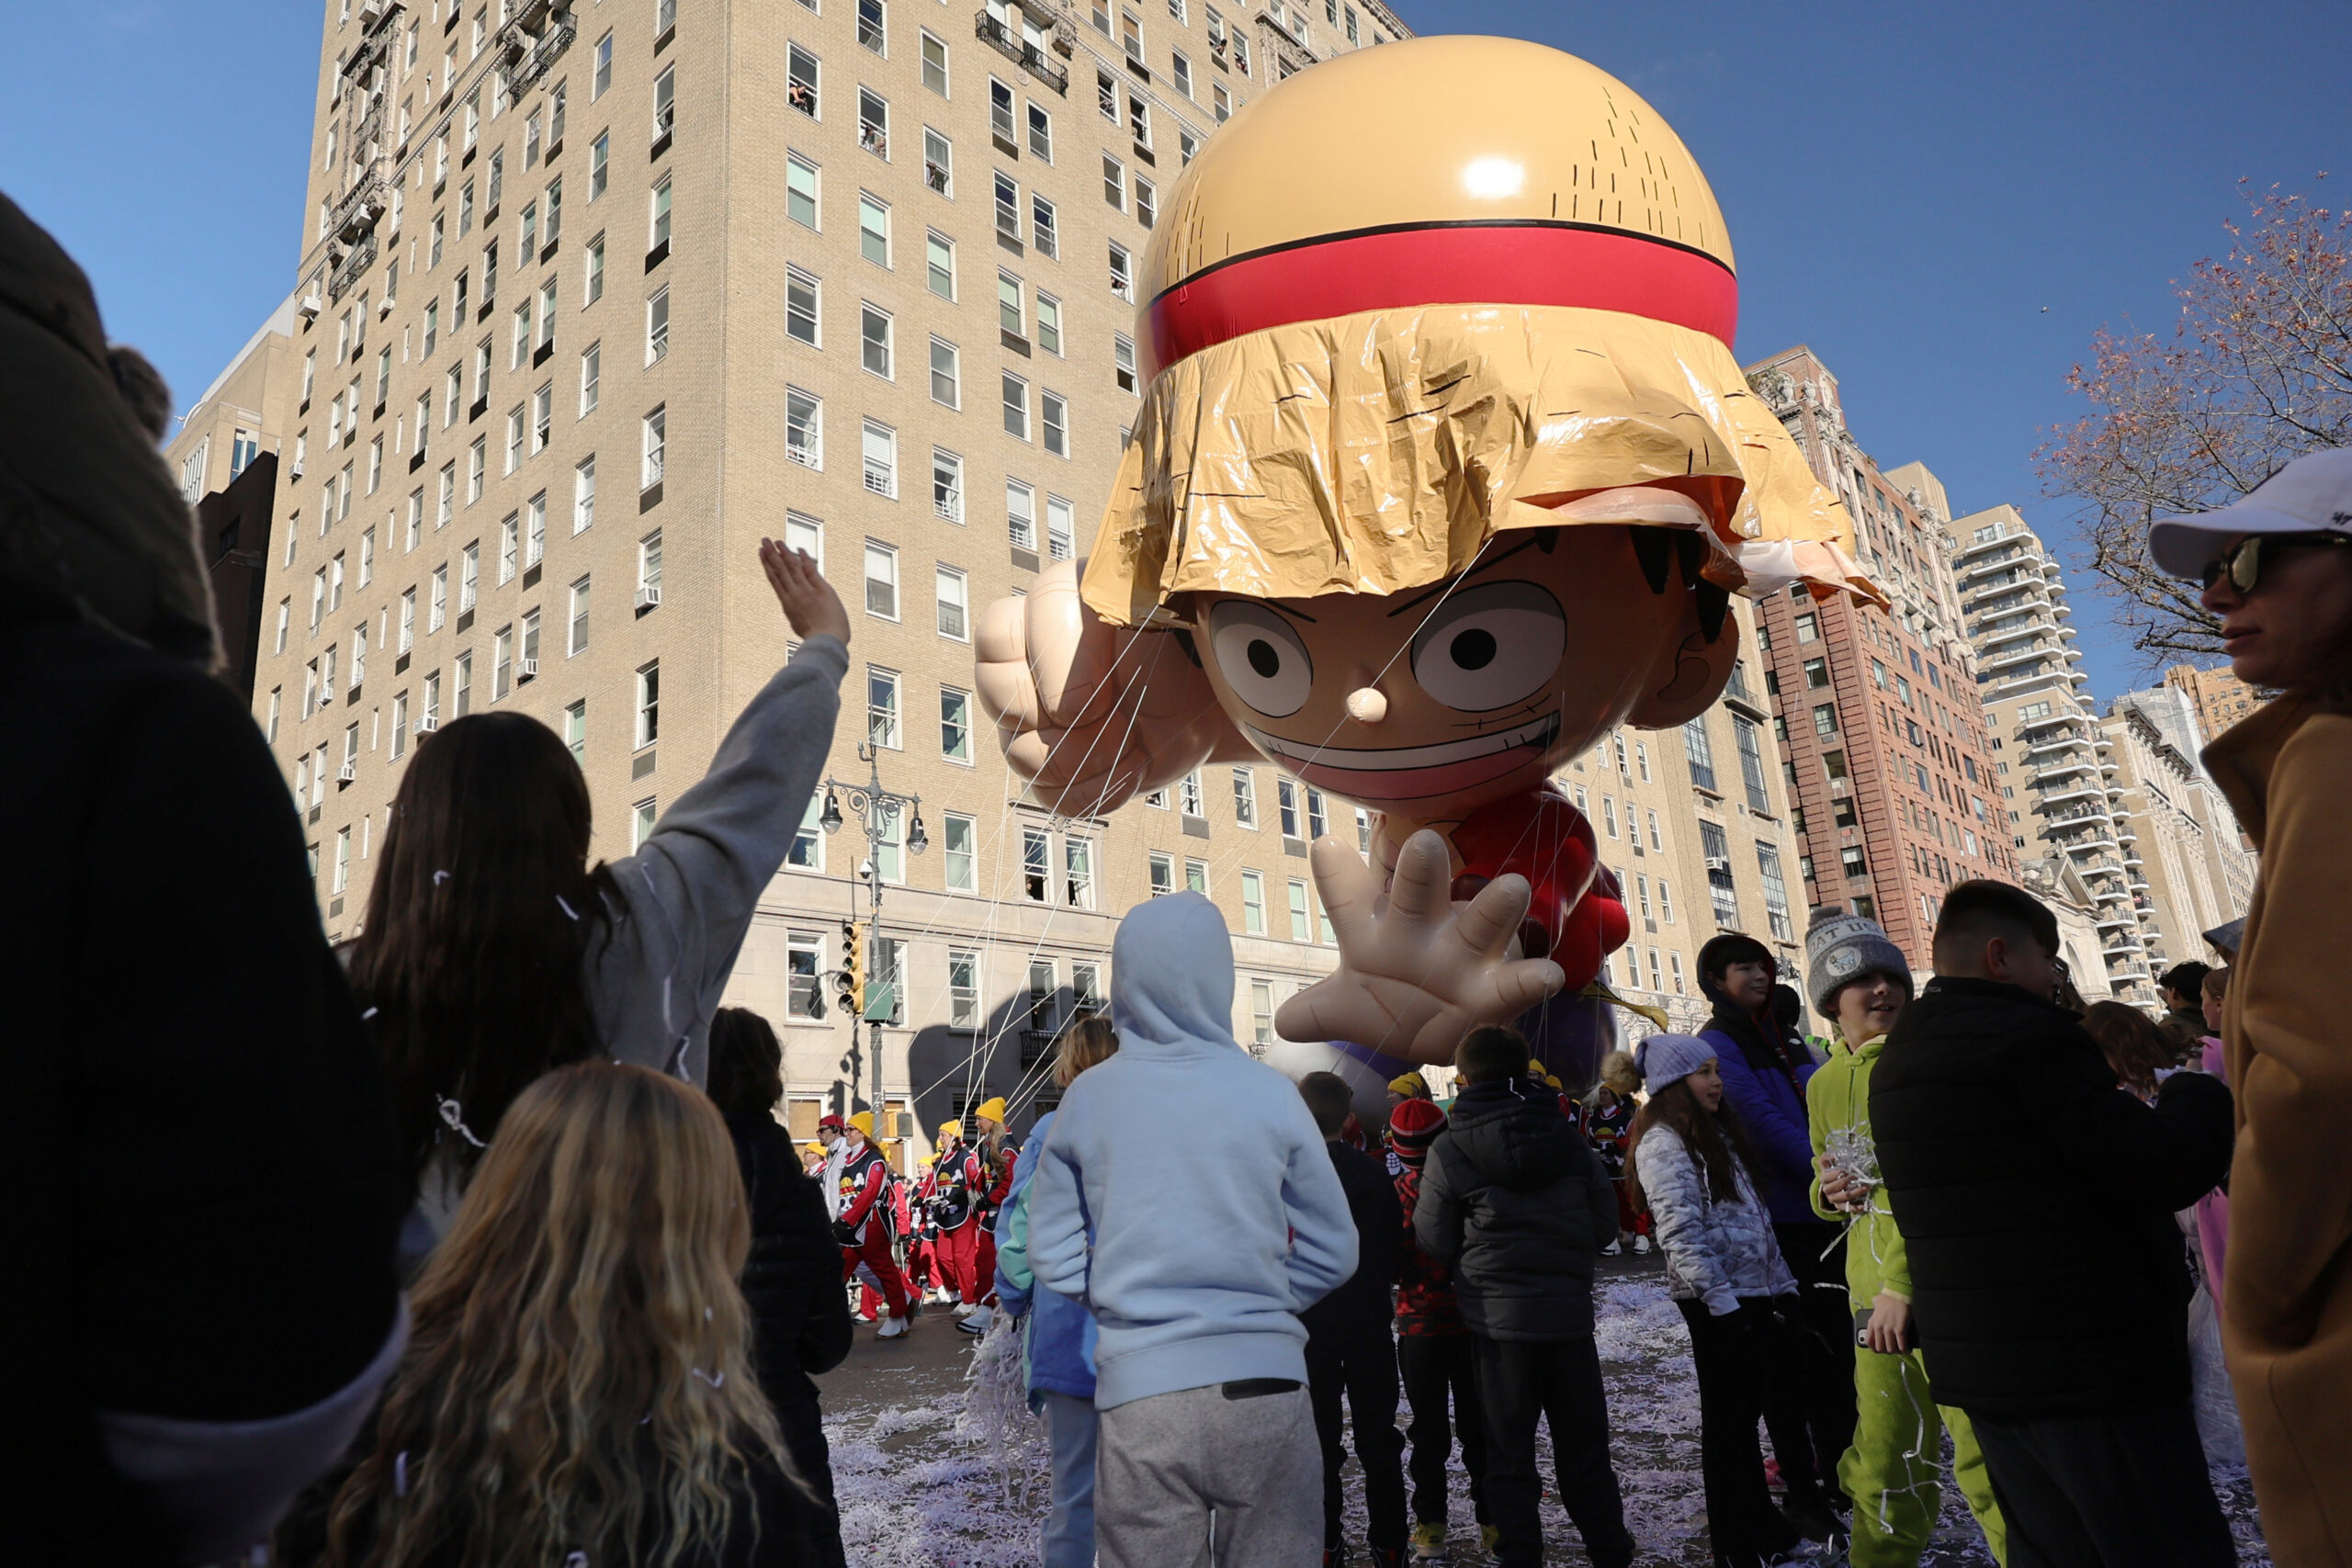 ‘One Piece’ Float in Macy’s Thanksgiving Day Parade Goes Viral for